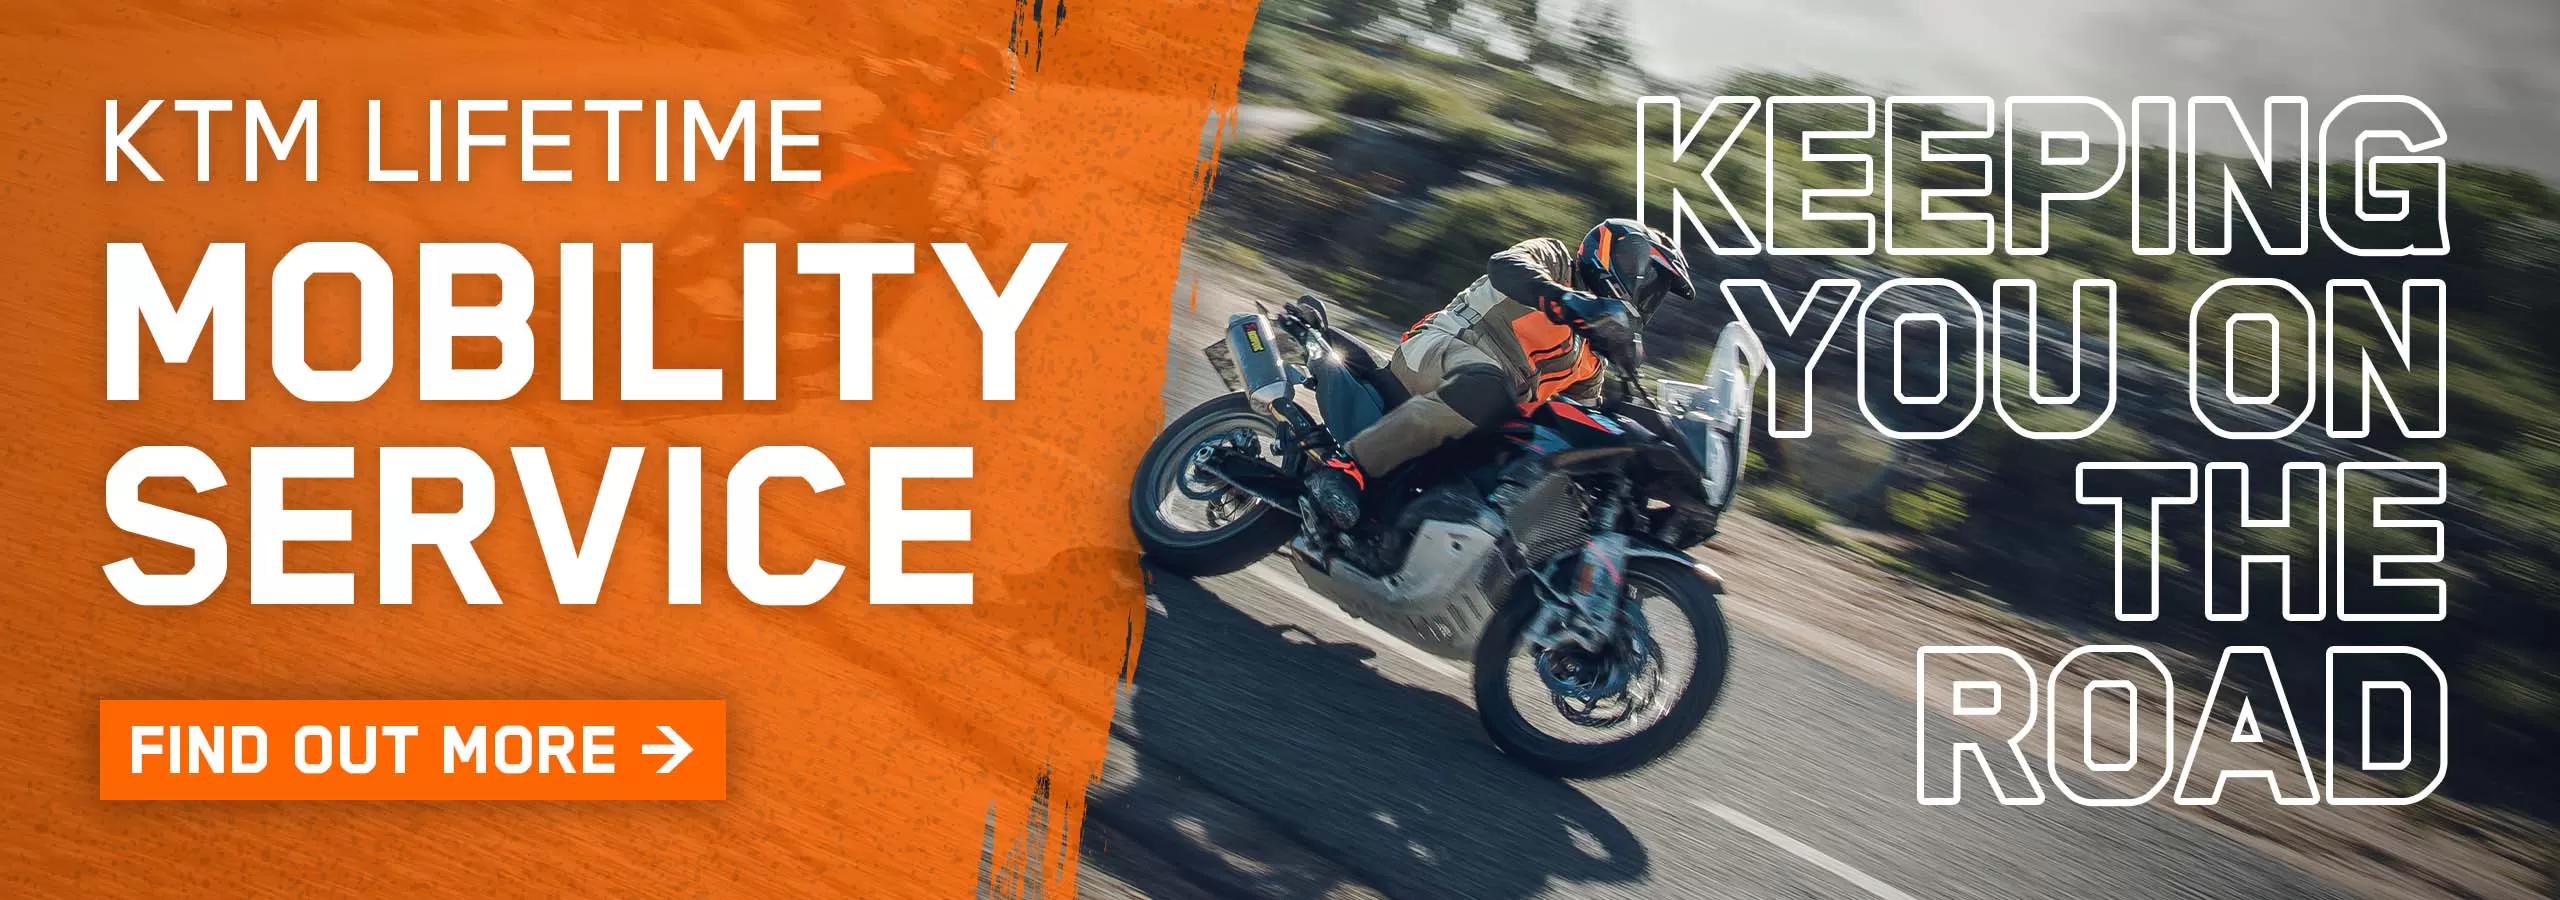 KTM Lifetime Mobility Service available at Laguna Motorcycles